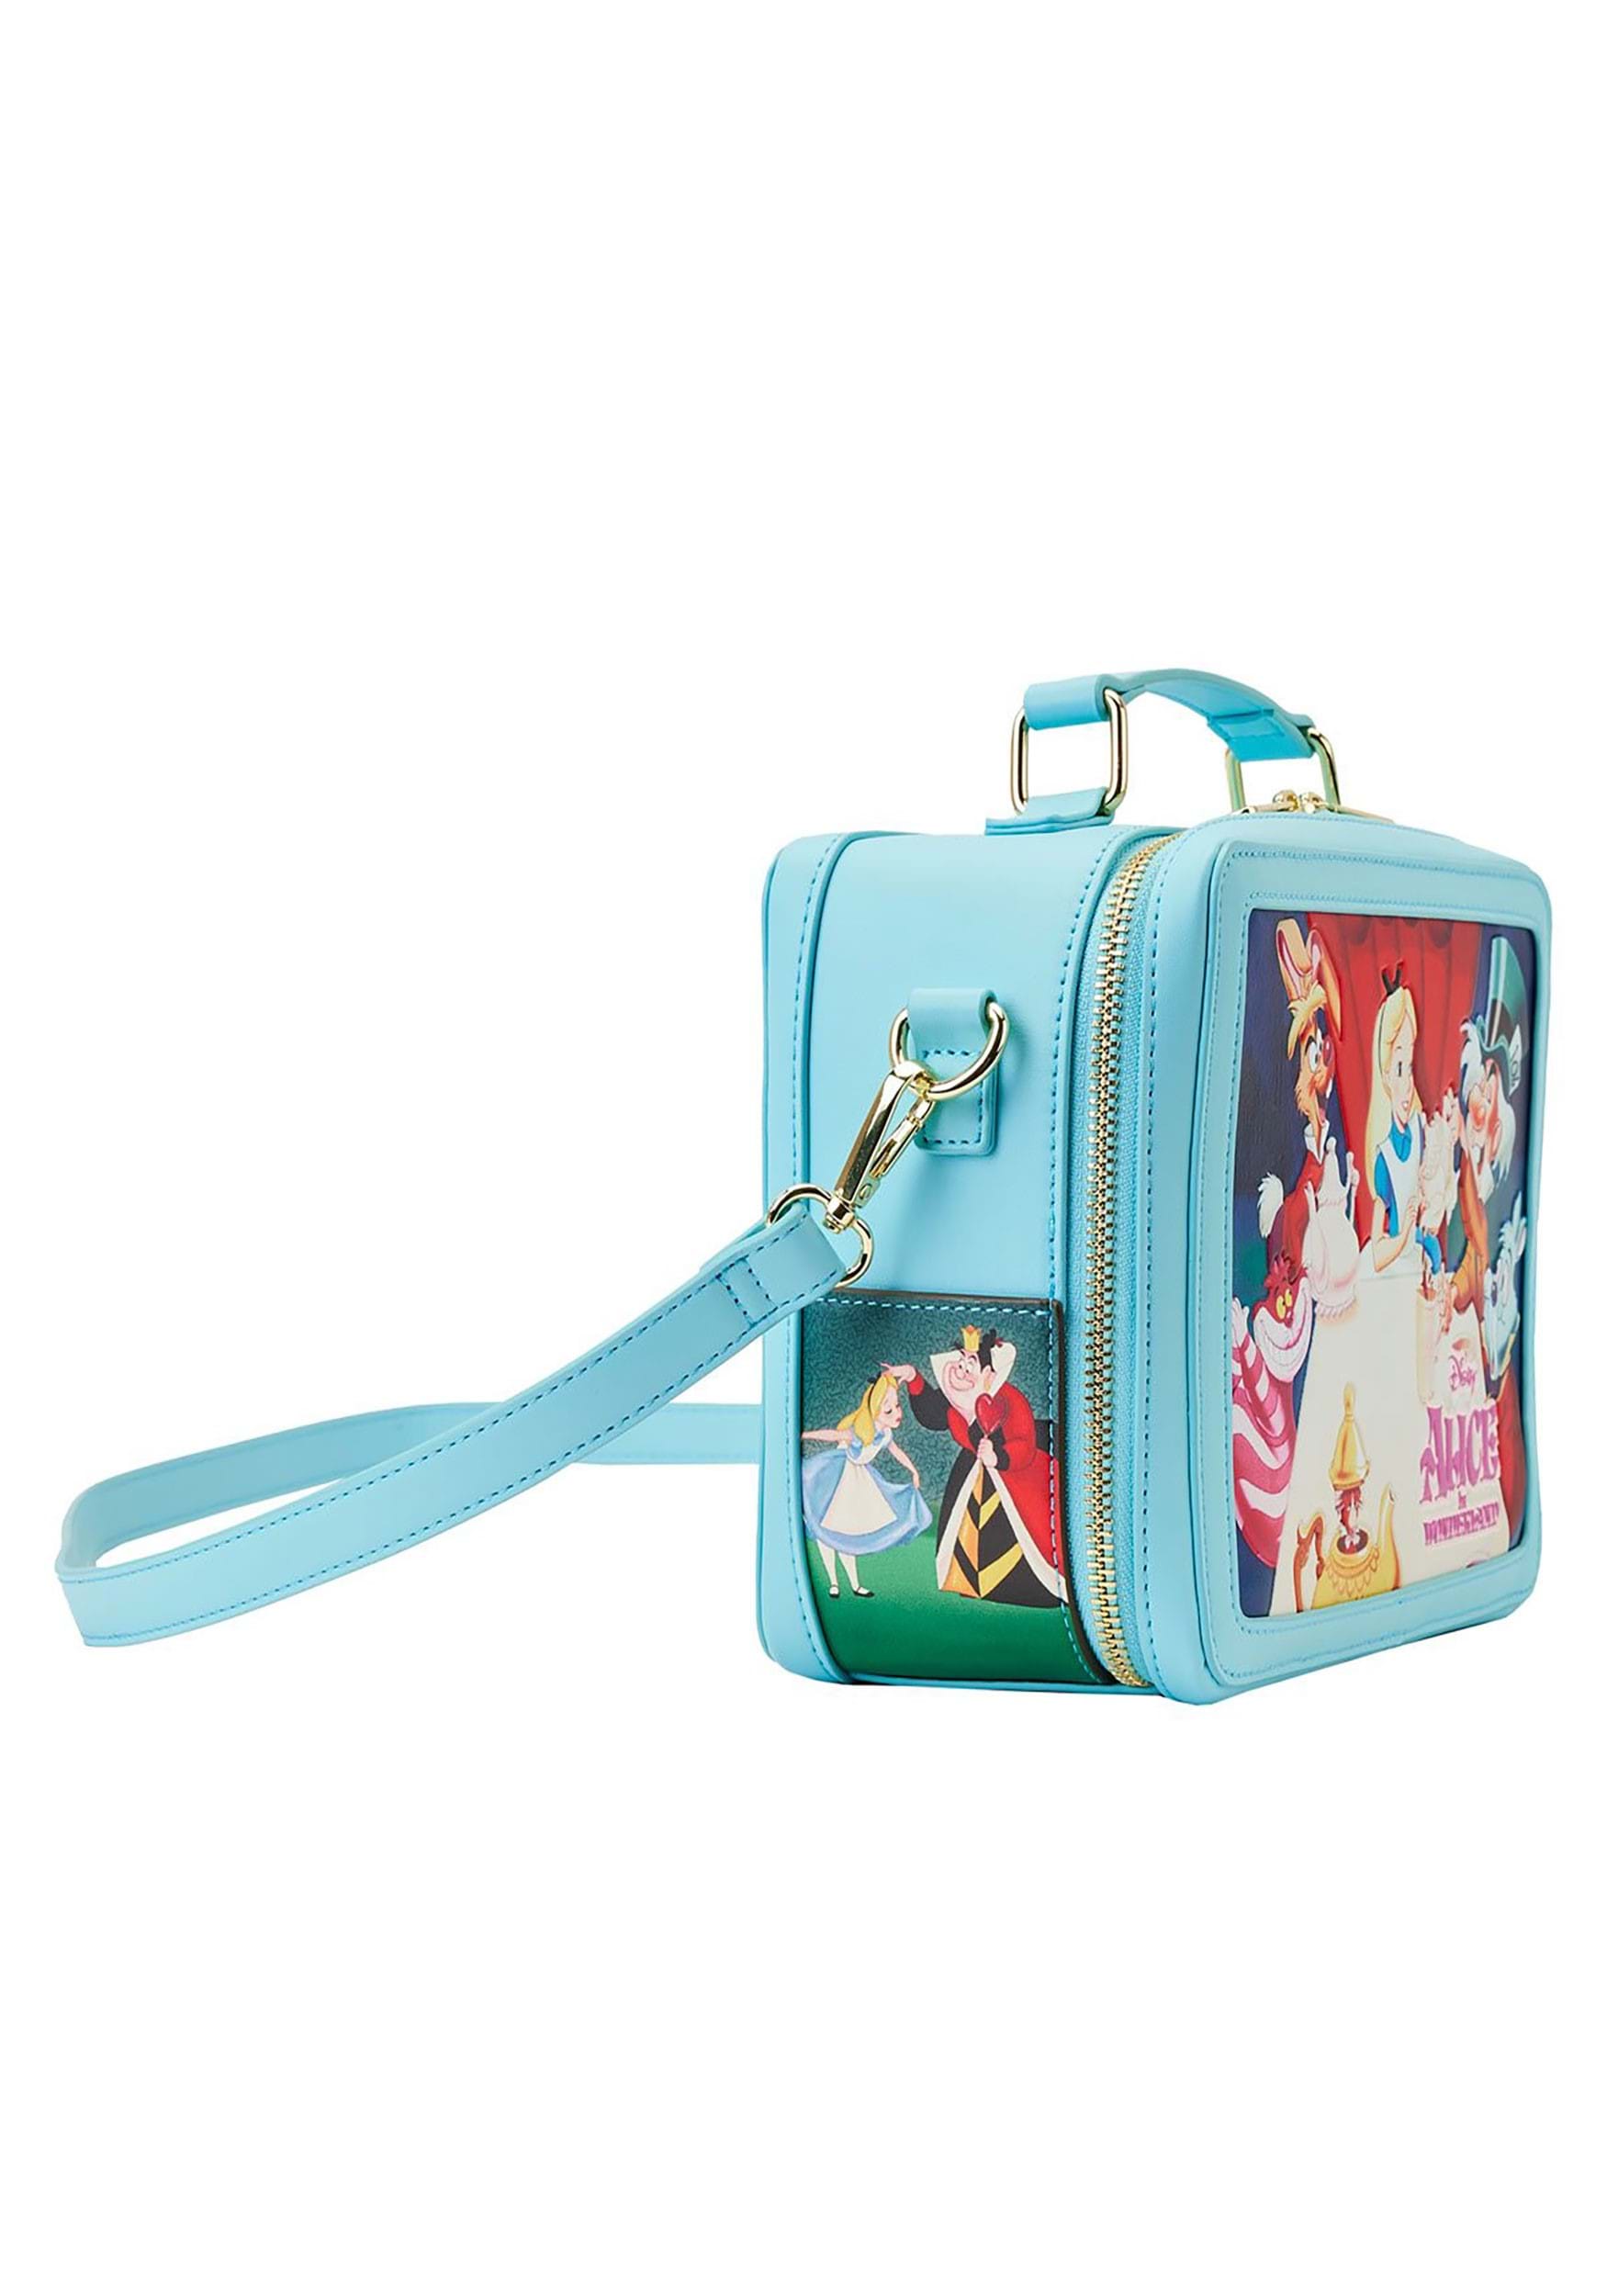 https://images.fun.com/products/91364/2-1-272361/loungefly-disney-alice-in-wonderland-lunch-box-bag-alt-3.jpg